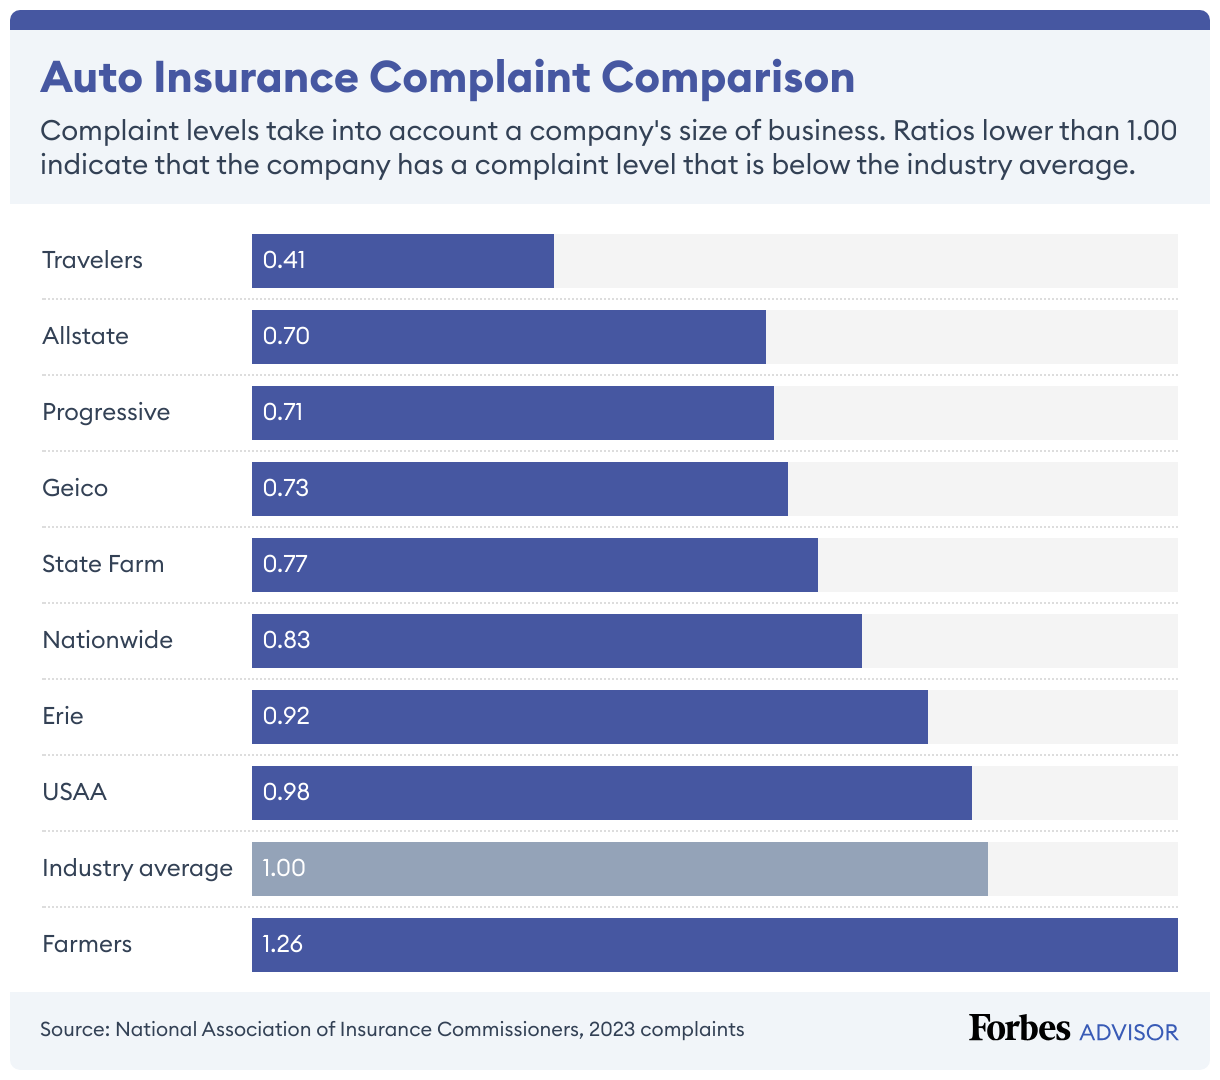 Allstate has a lower level of auto insurance complaints than the industry average and is also lower than many competitors, such as Geico, Farmers and USAA.